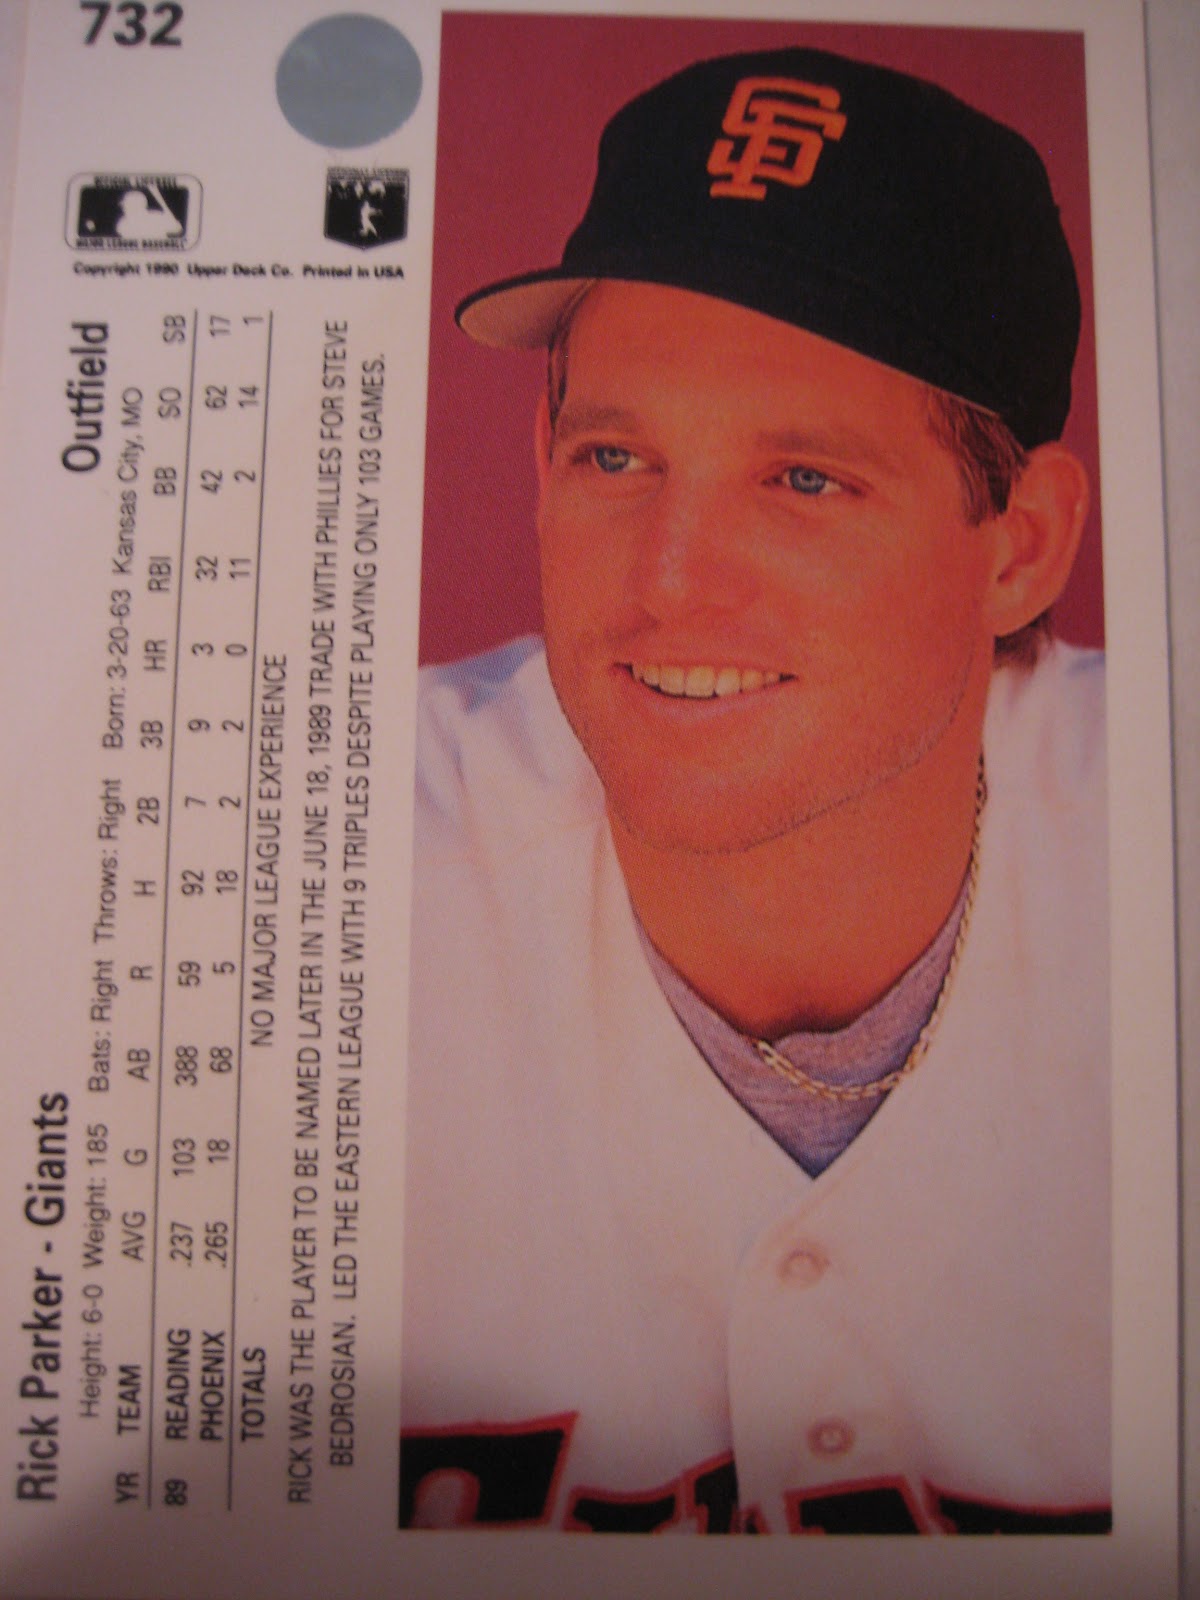 Baseball Cards Come to Life!: Rick Parker on baseball cards1200 x 1600